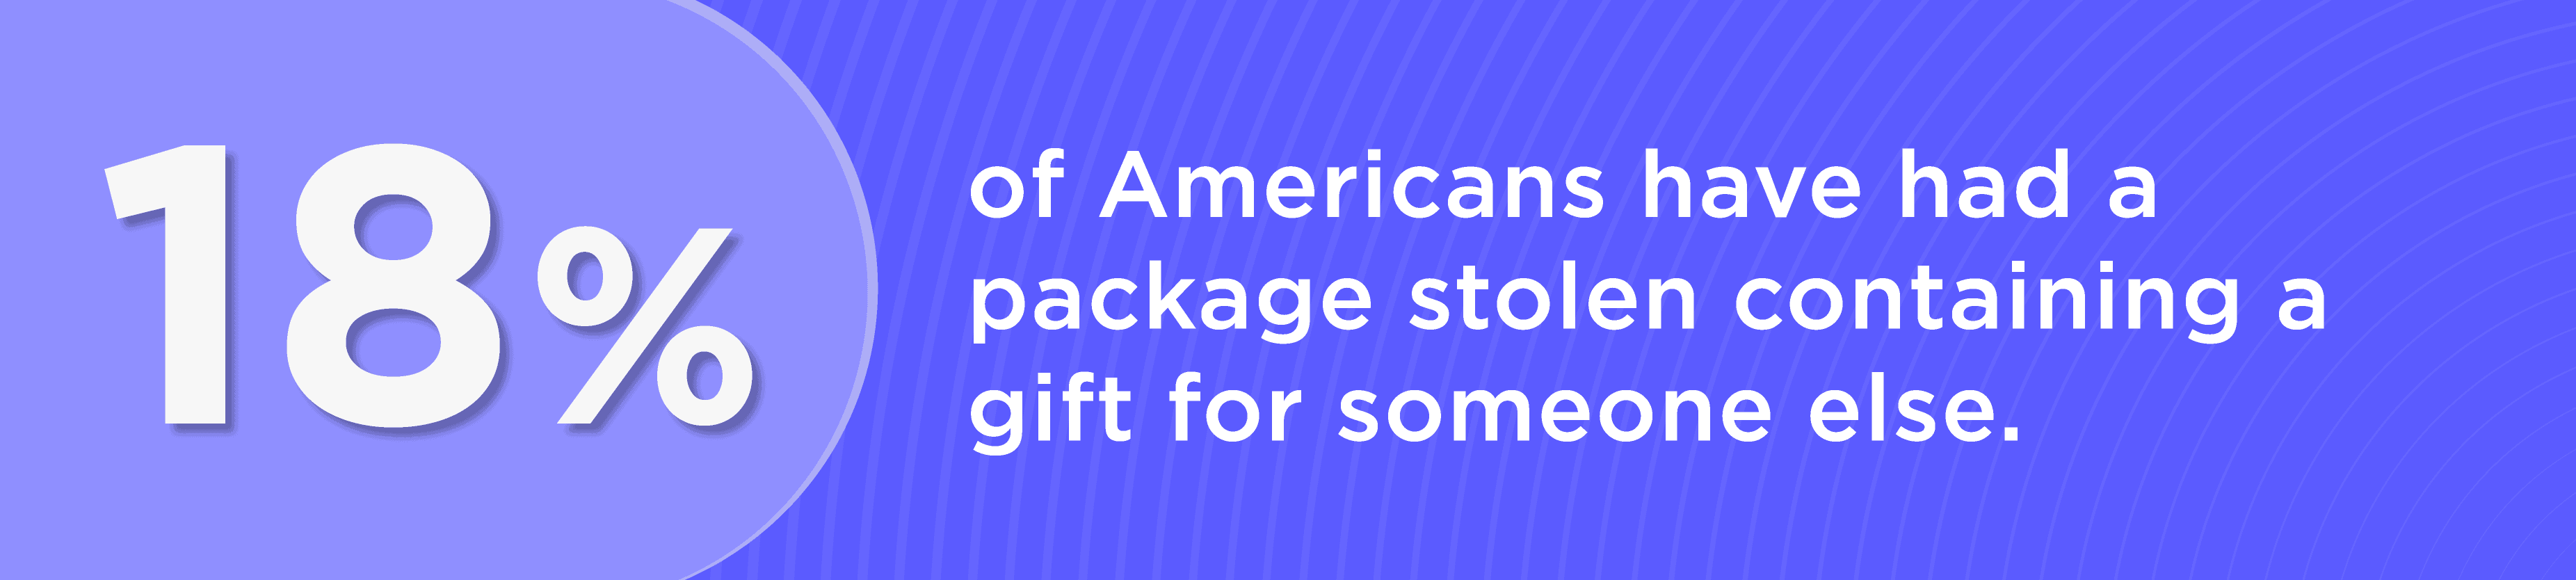 18% of Americans have had a package stolen containing a gift for someone else.